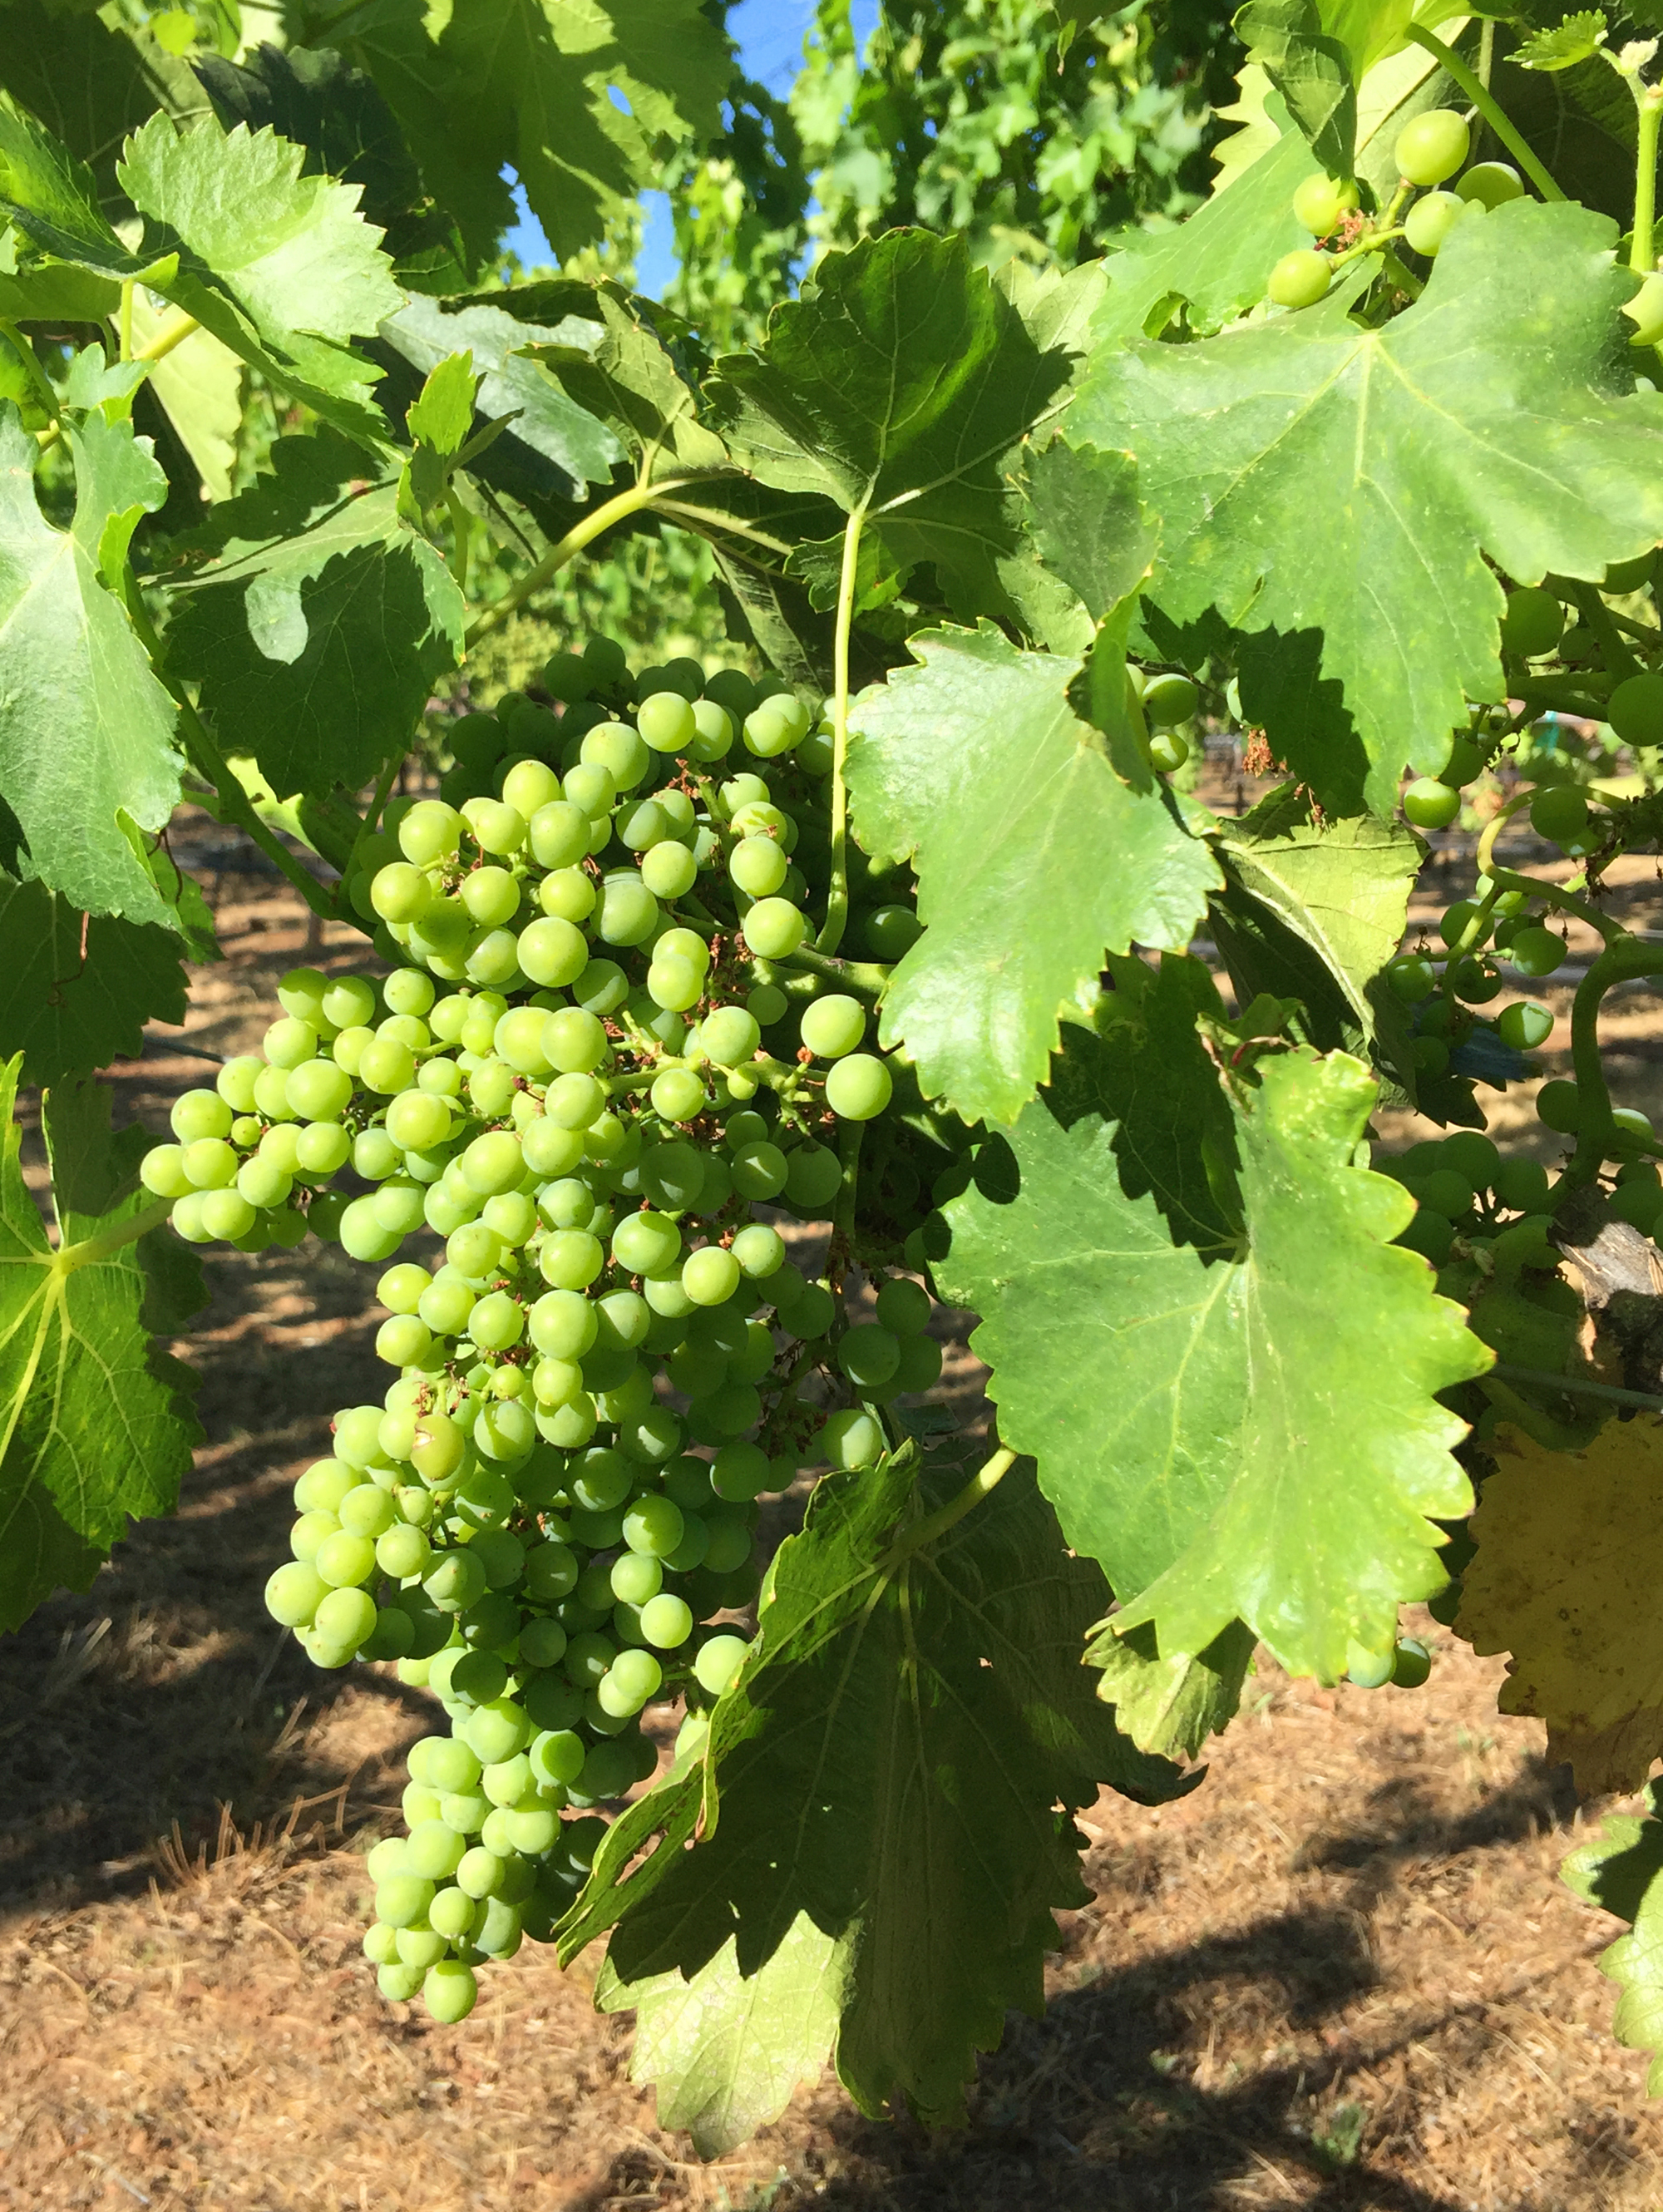 Green Grapes Ripening on The Grapevine In The Sun